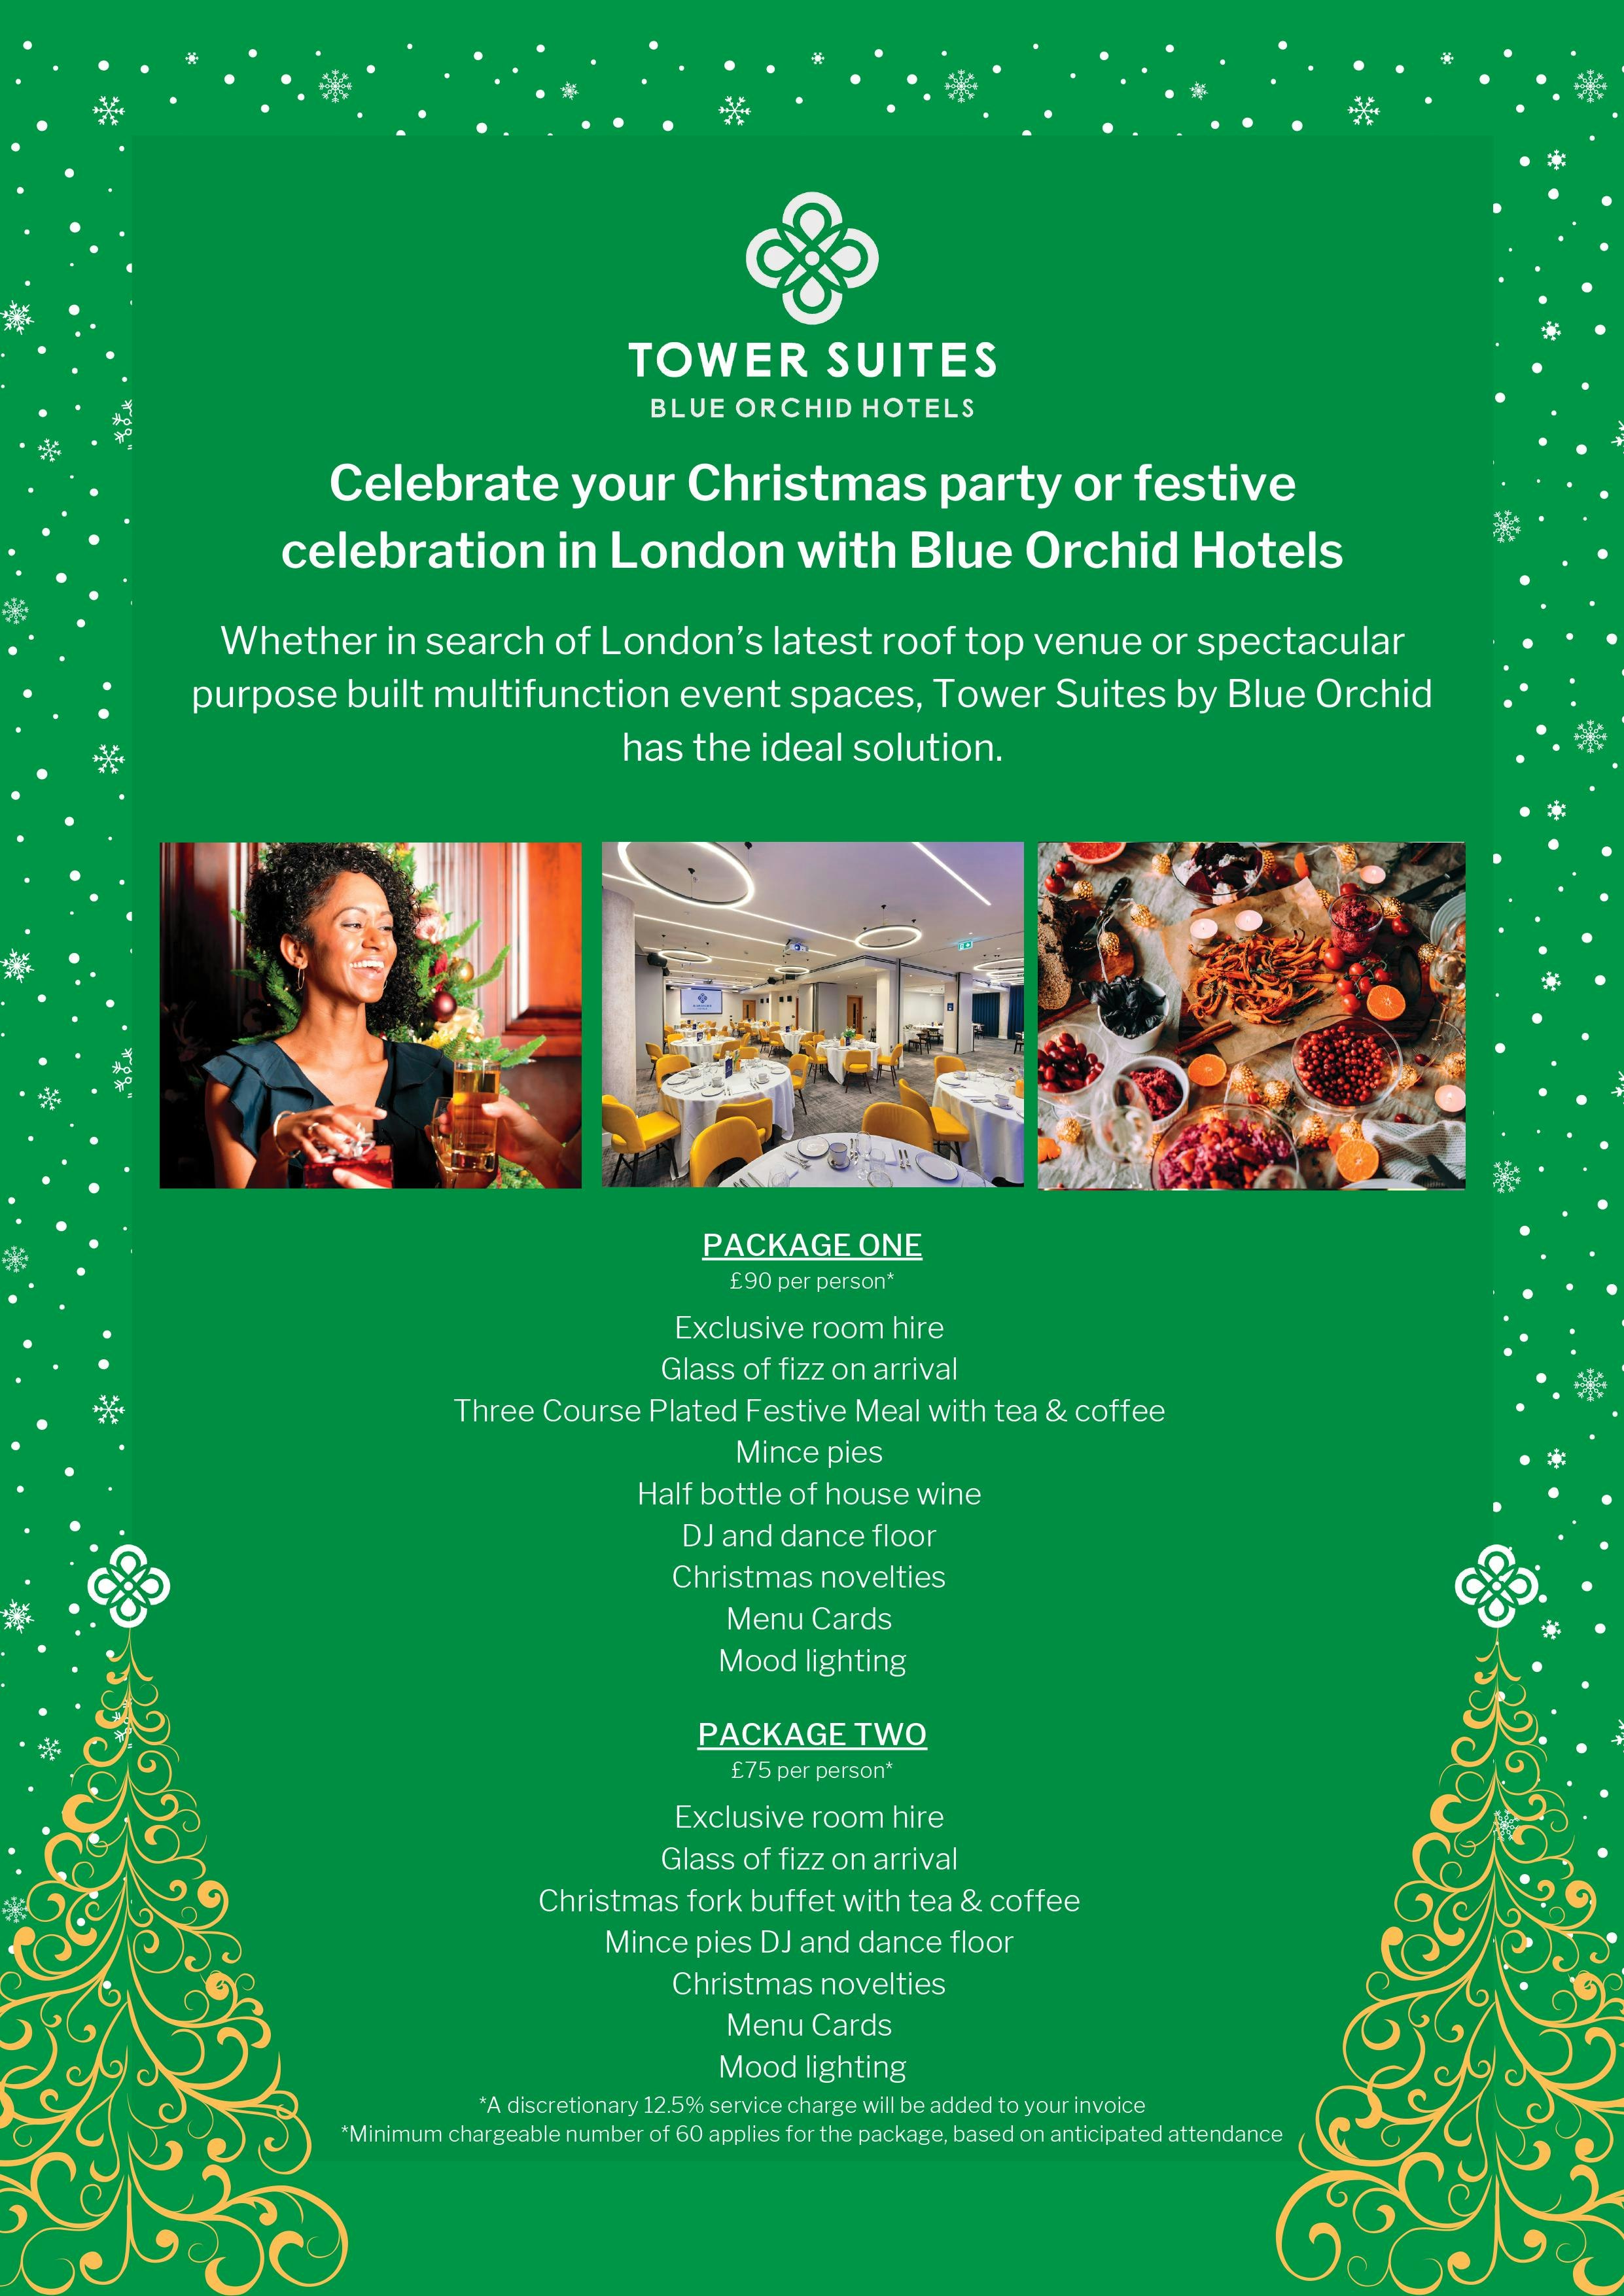 Tower Hill Venue Hire - Tower Suites by Blue Orchid - Events in Christmas Party at Blue Orchid Hotels - Banner